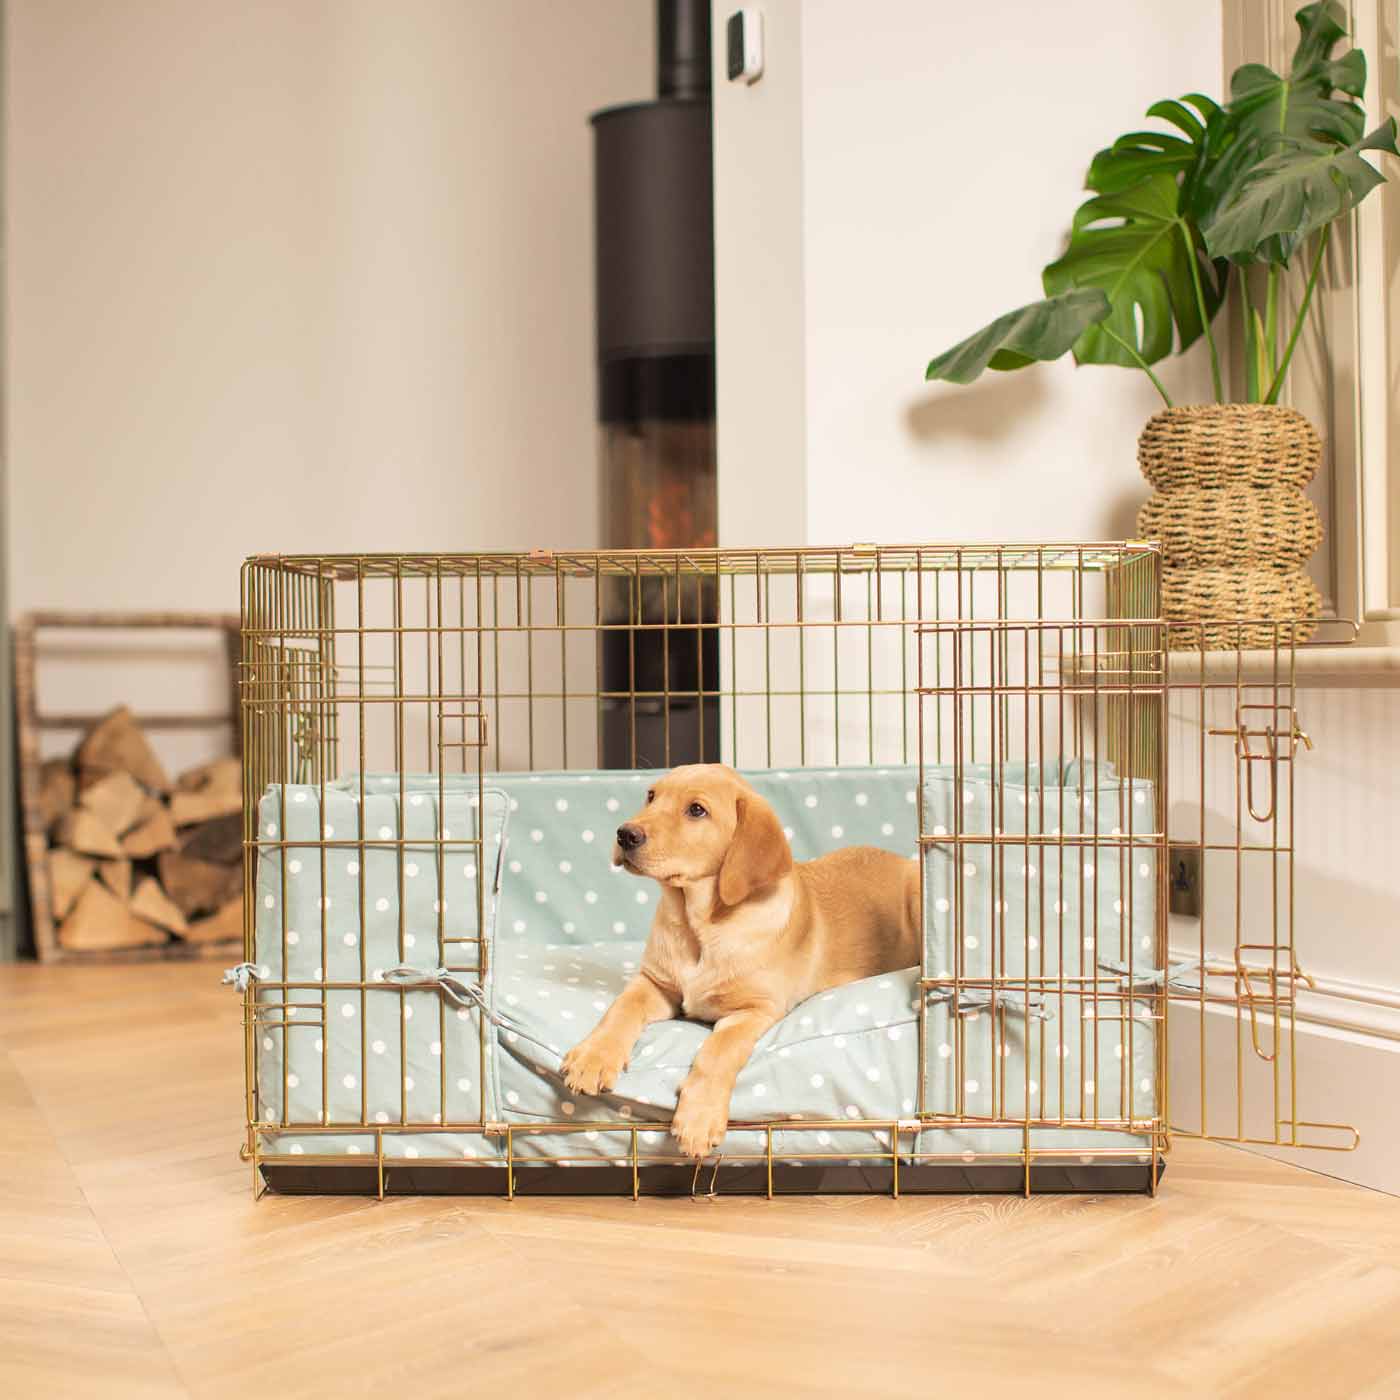 Luxury Gold Dog Cage Set With Cushion, Bumper and Crate Cover. The Perfect Dog Crate For The Ultimate Naptime, Available Now at Lords & Labradors US 